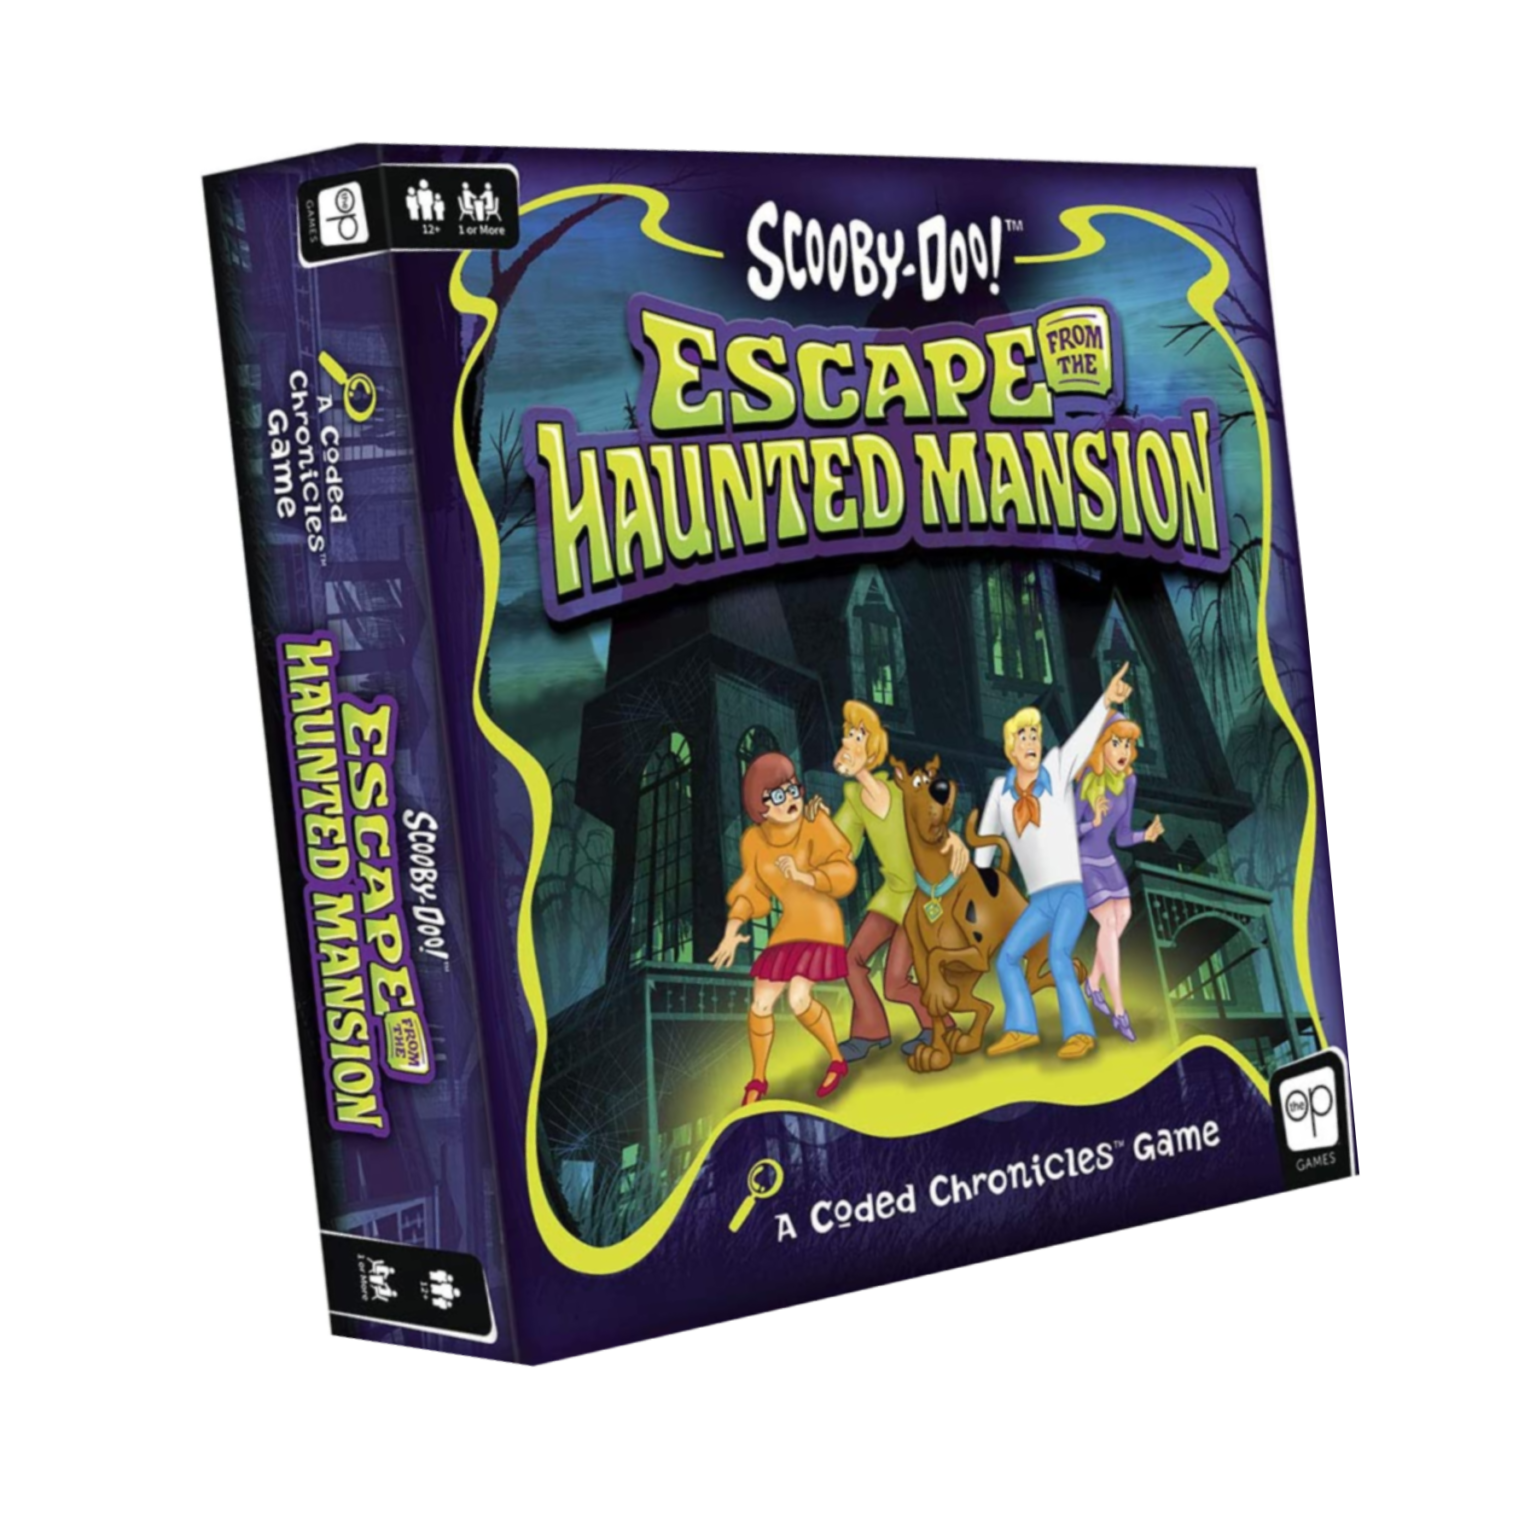 scooby-doo-escape-from-the-haunted-mansion-a-coded-chronicles-game